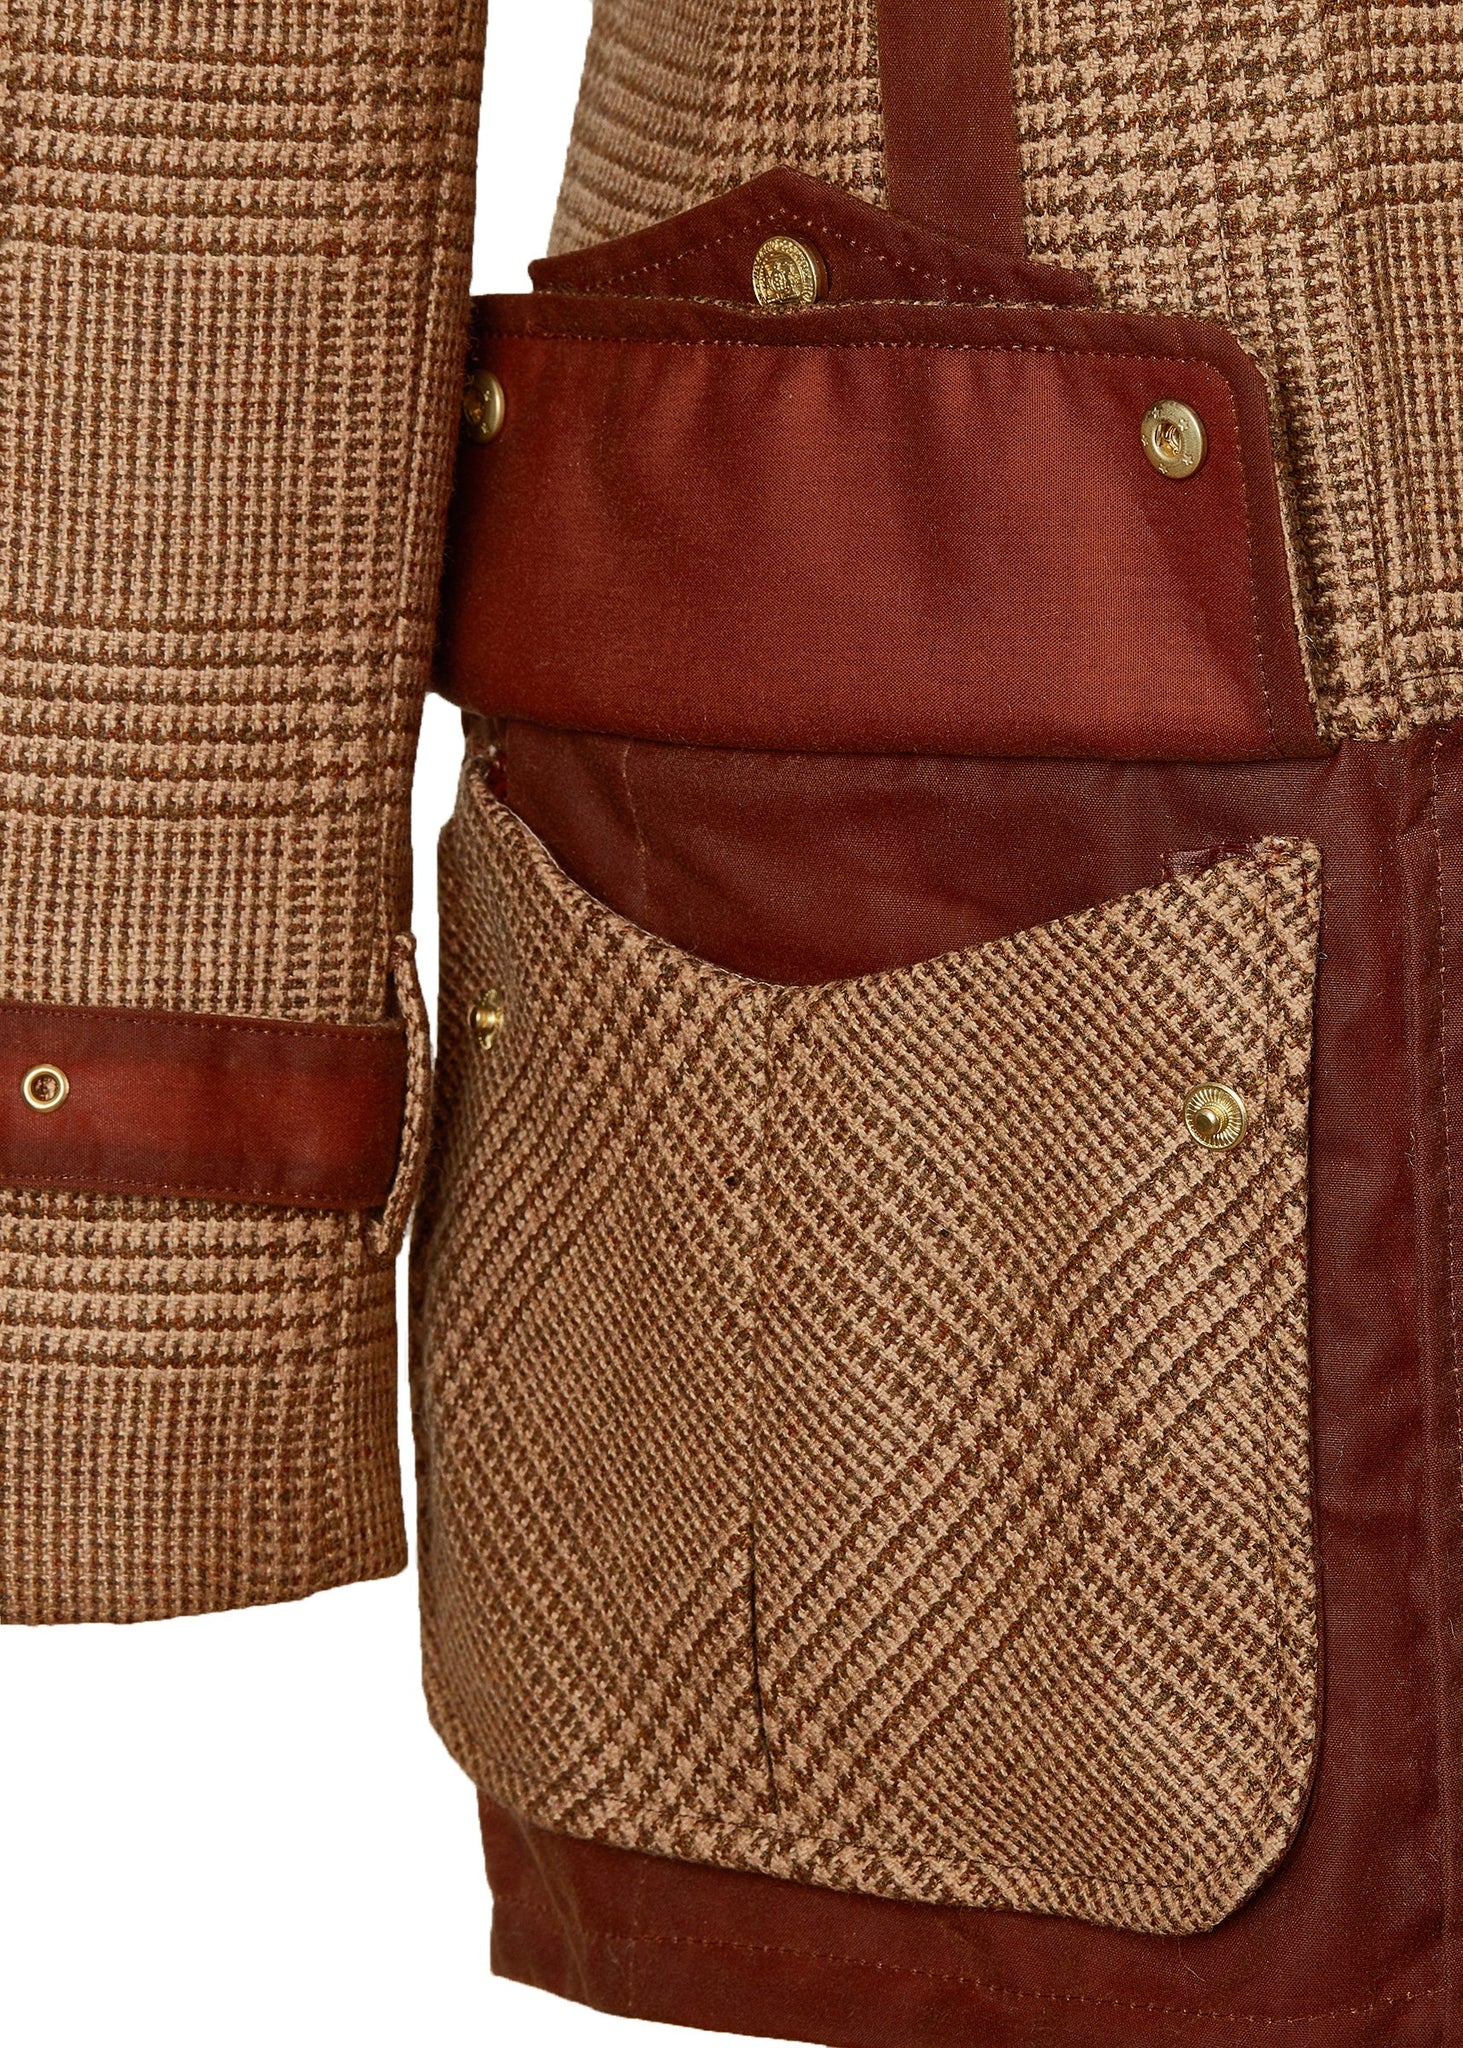 open pocket detail on hip of womens fitted field jacket in tawny and brown check tweed trimmed with contrast tan wax fabric on shoulder across back and on the hip with faux fur trim around the neck finished with horn button fastenings an buckles on the collar cuffs and hip